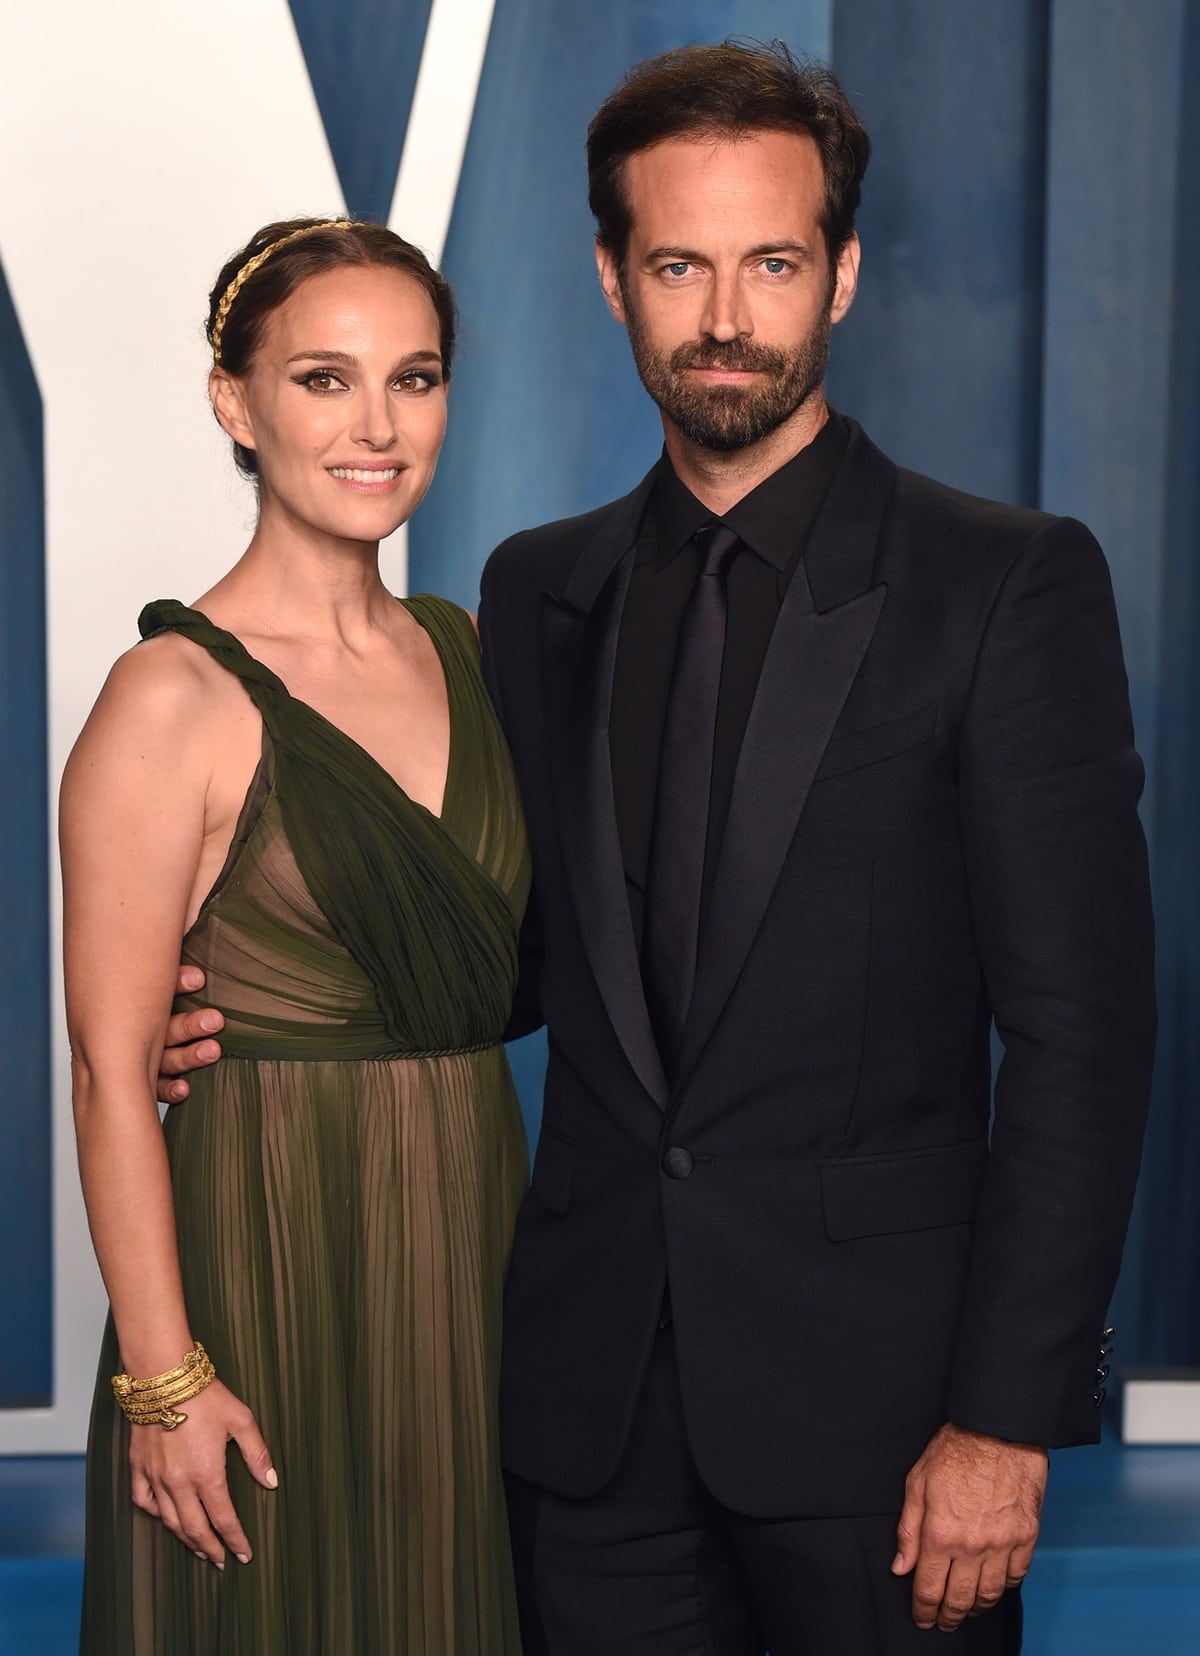 Natalie Portman and Benjamin Millepied met while filming the 2010 psychological thriller Black Swan, for which Millepied served as choreographer